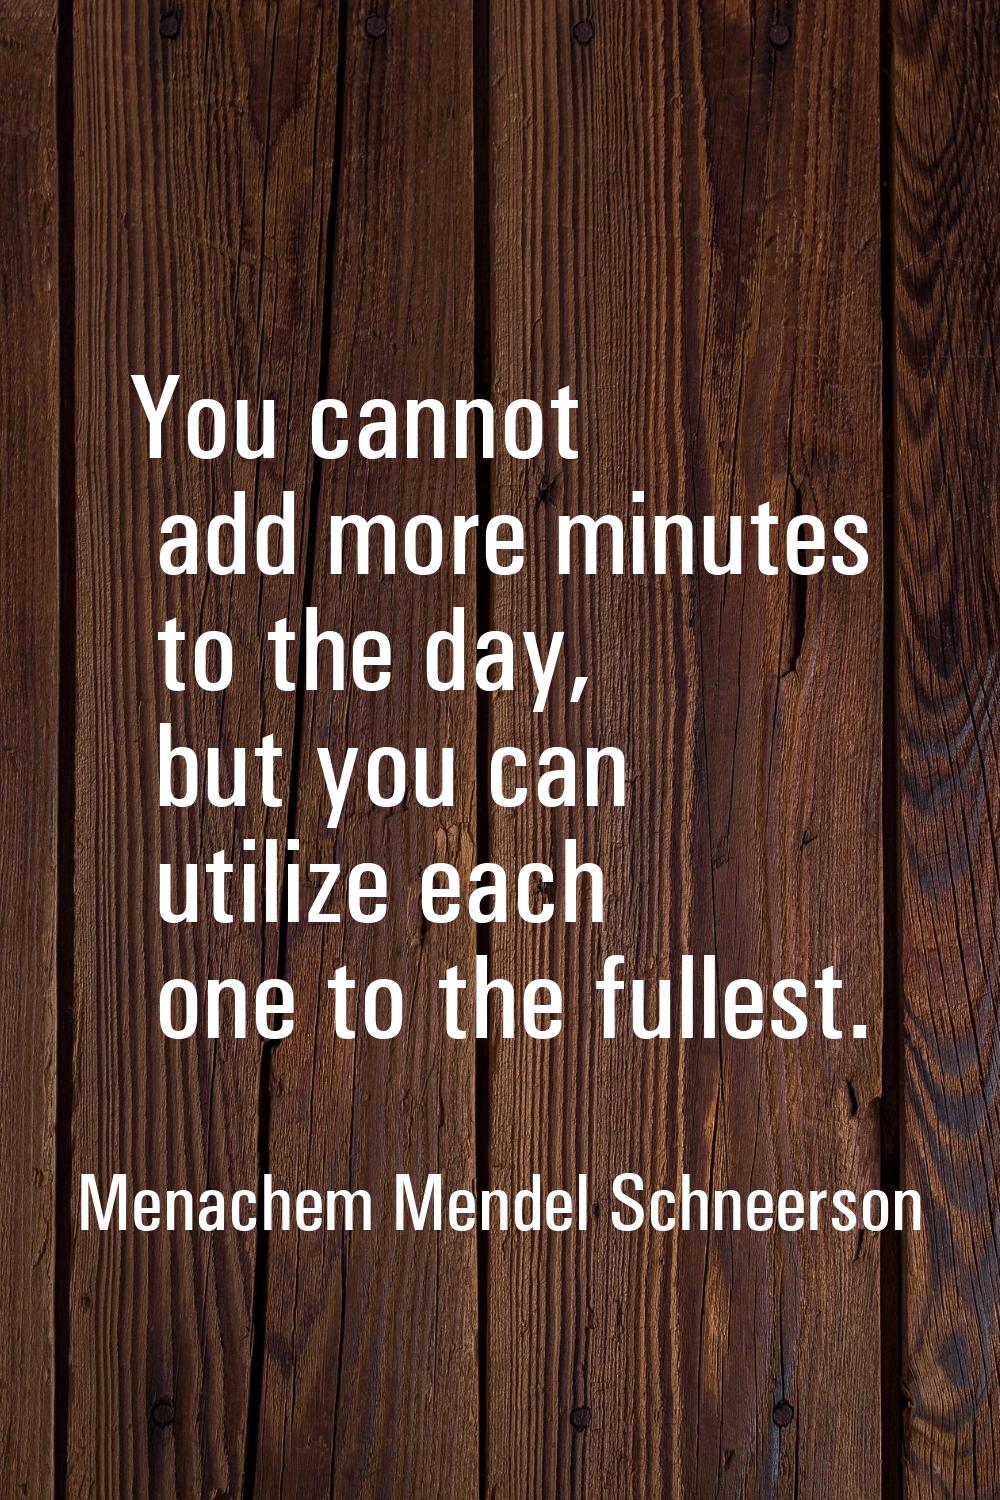 You cannot add more minutes to the day, but you can utilize each one to the fullest.